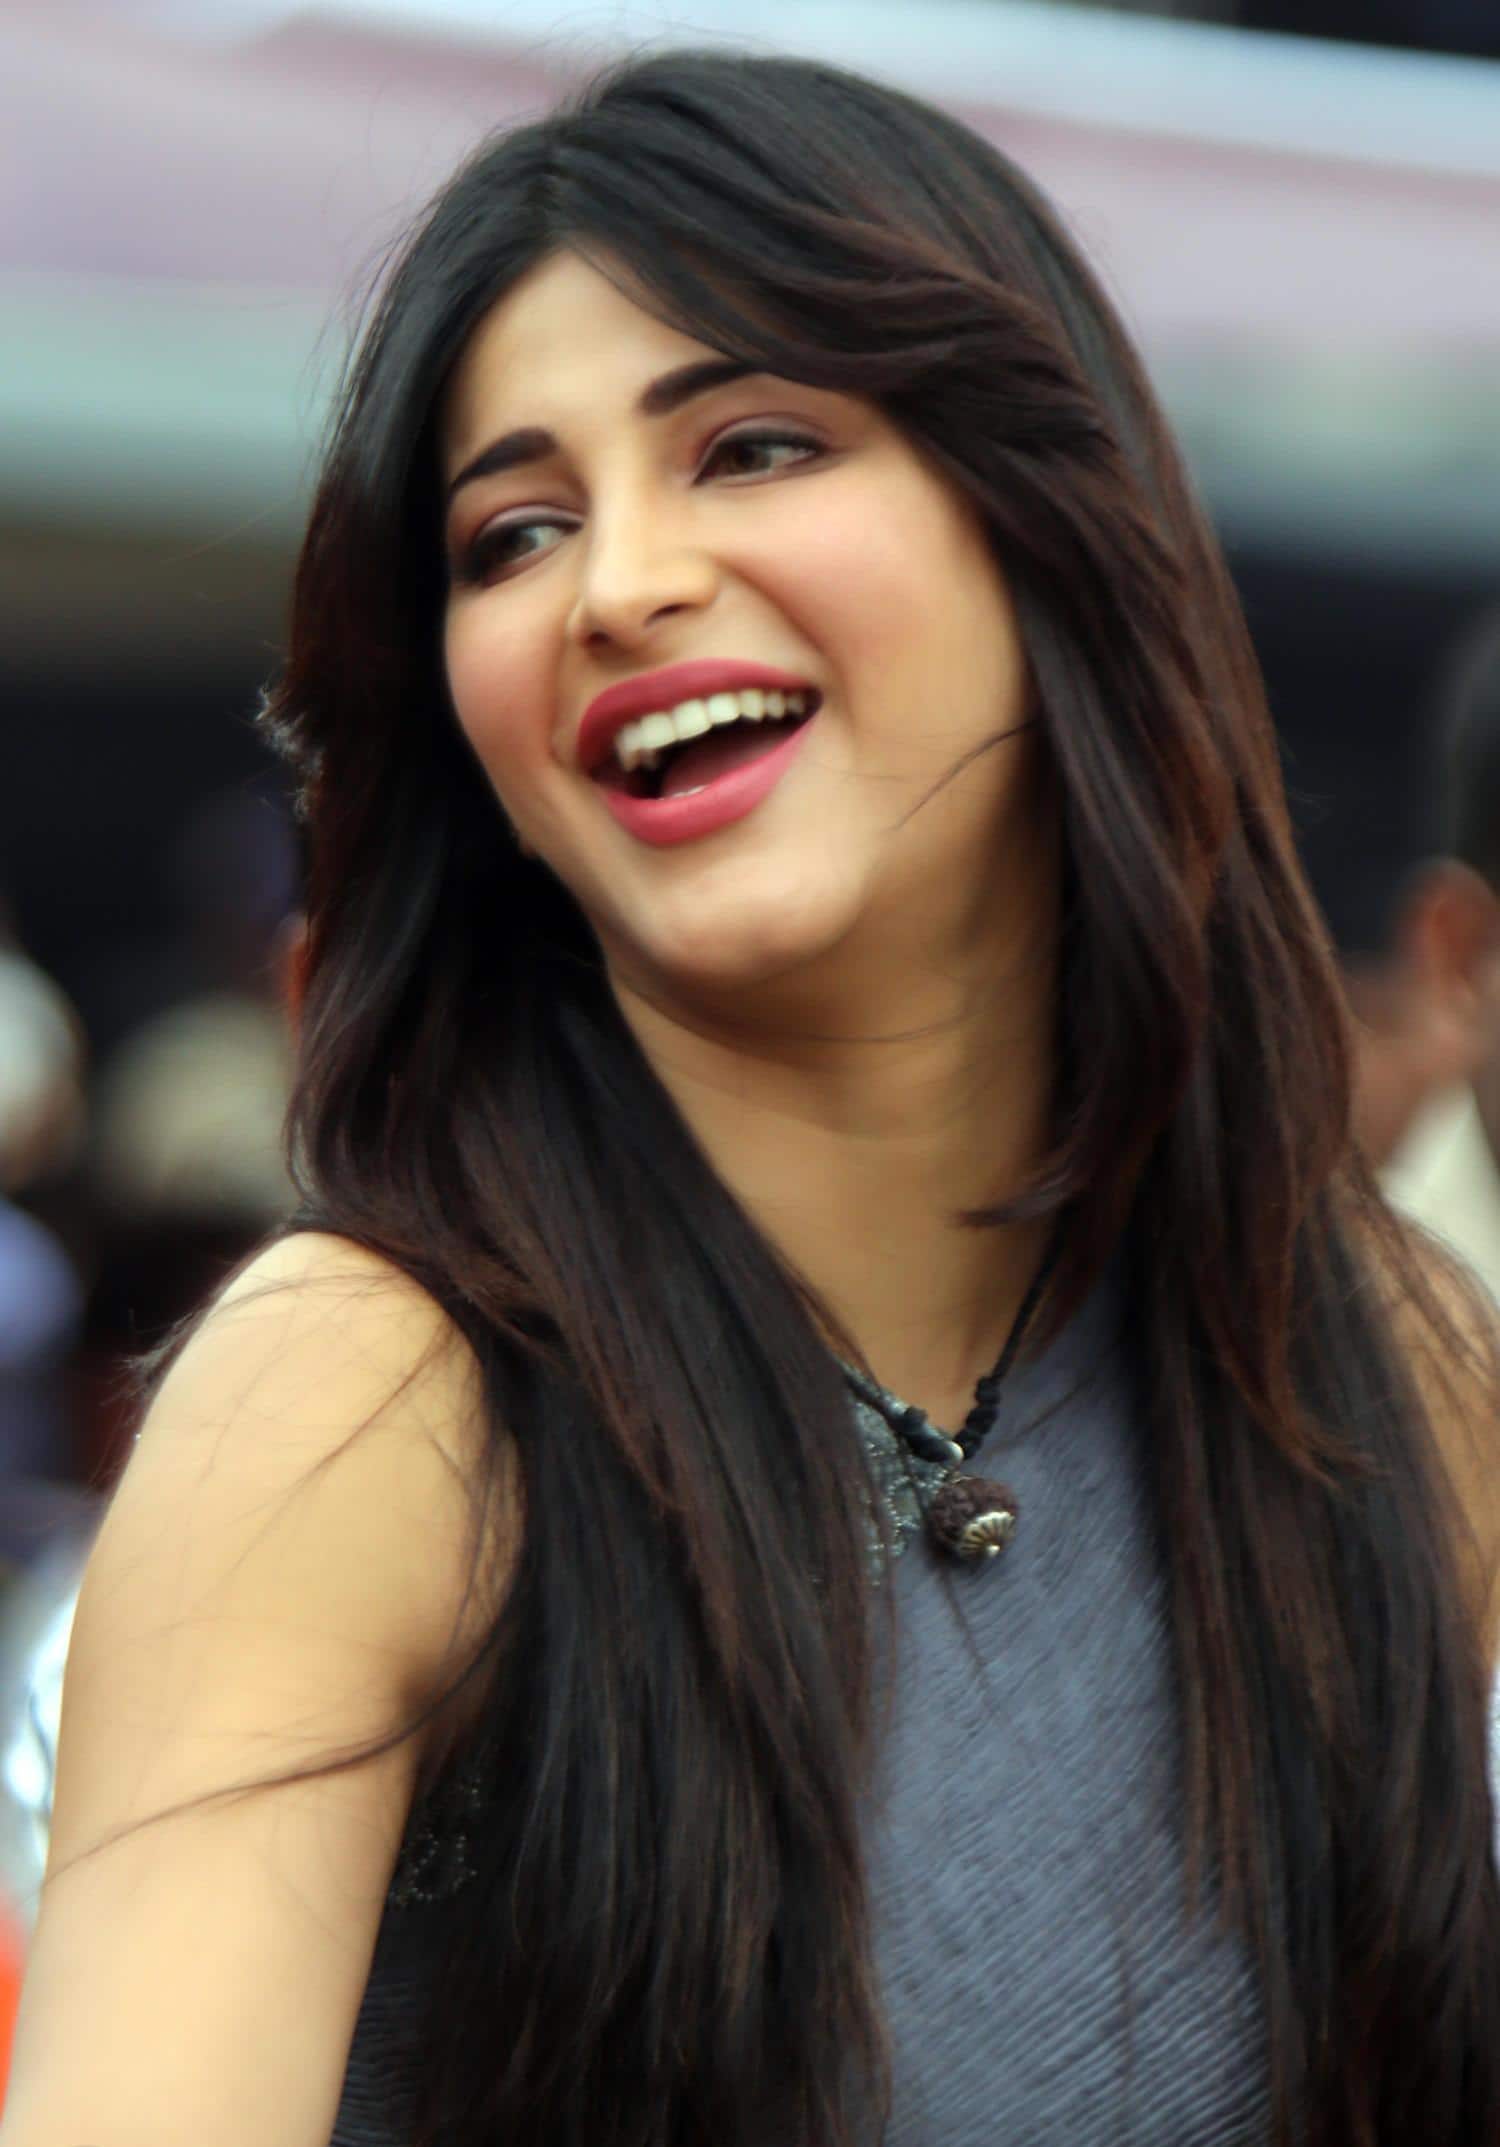 Followers are angry against shruti hassan activites